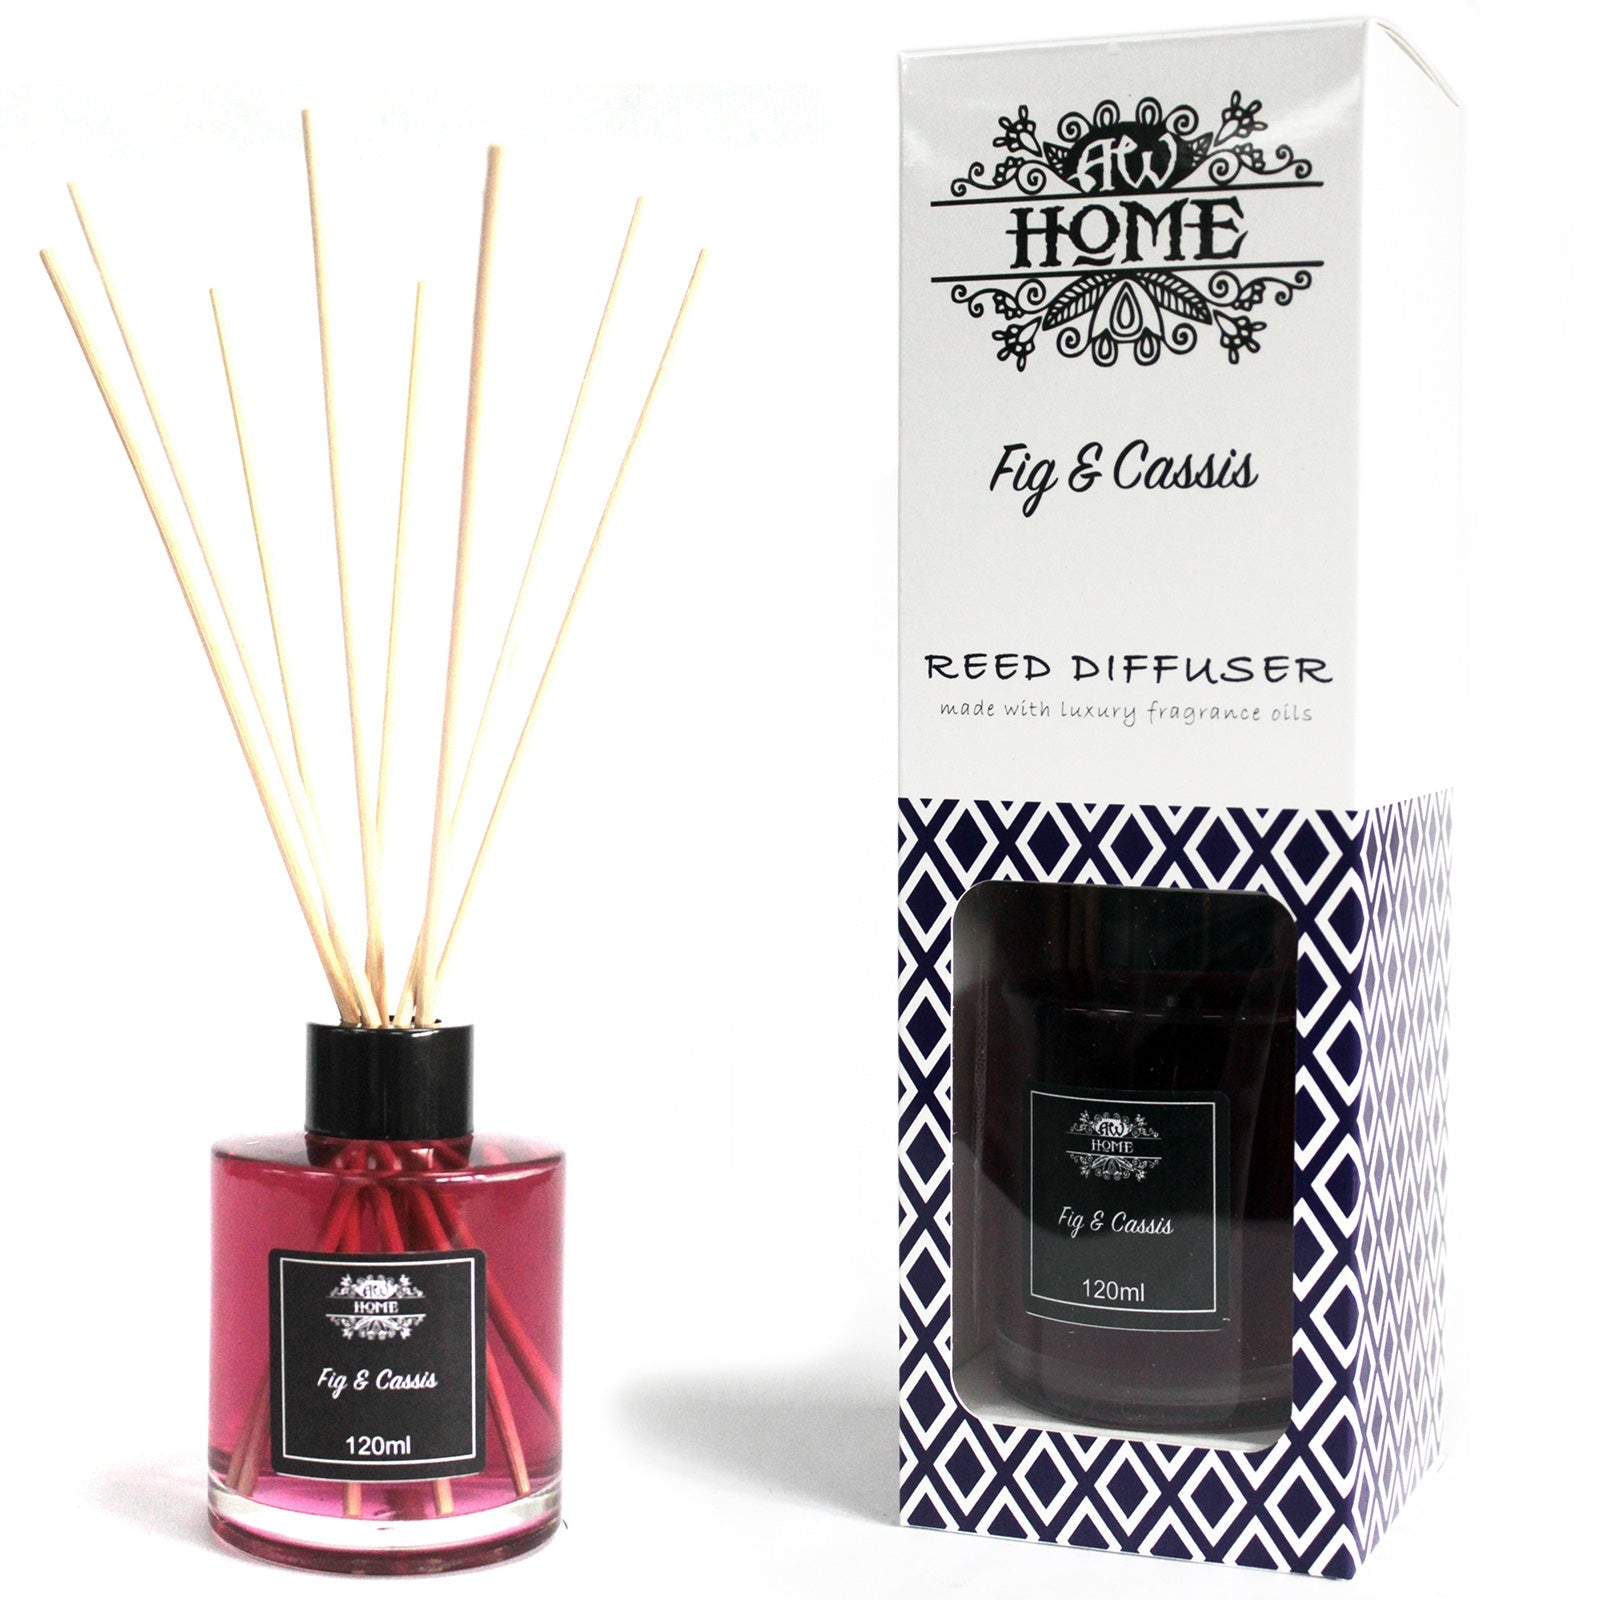 Home Fragrance Reed Diffuser - Various Fragrances - 120ml Home Fragrance Reed Diffusers - 120ml Soul Inspired Fig & Cassis 